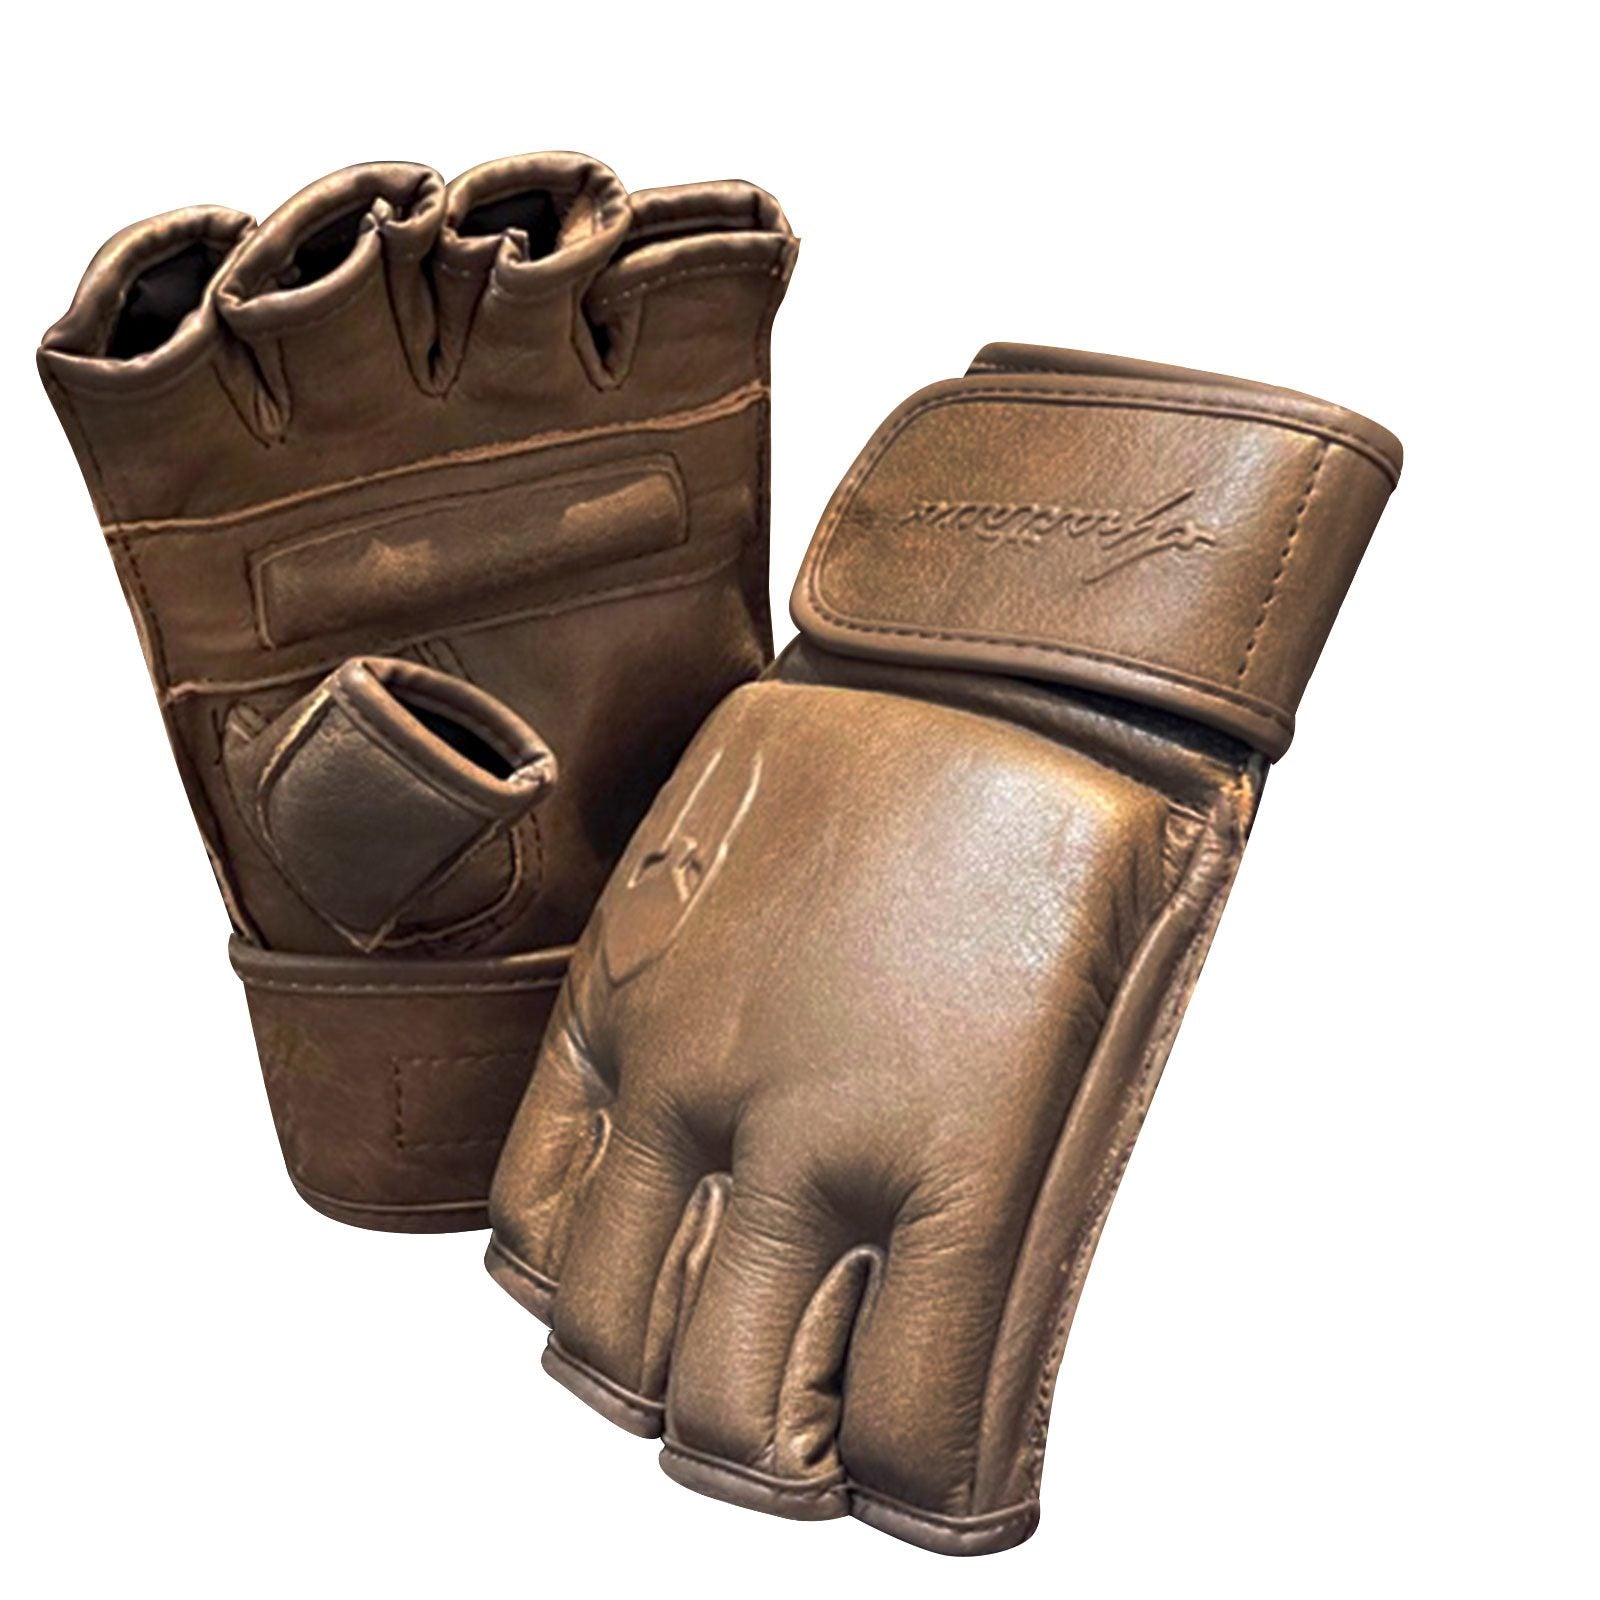 spartacus-1-mma-leather-grappling-gloves-martial-arts 